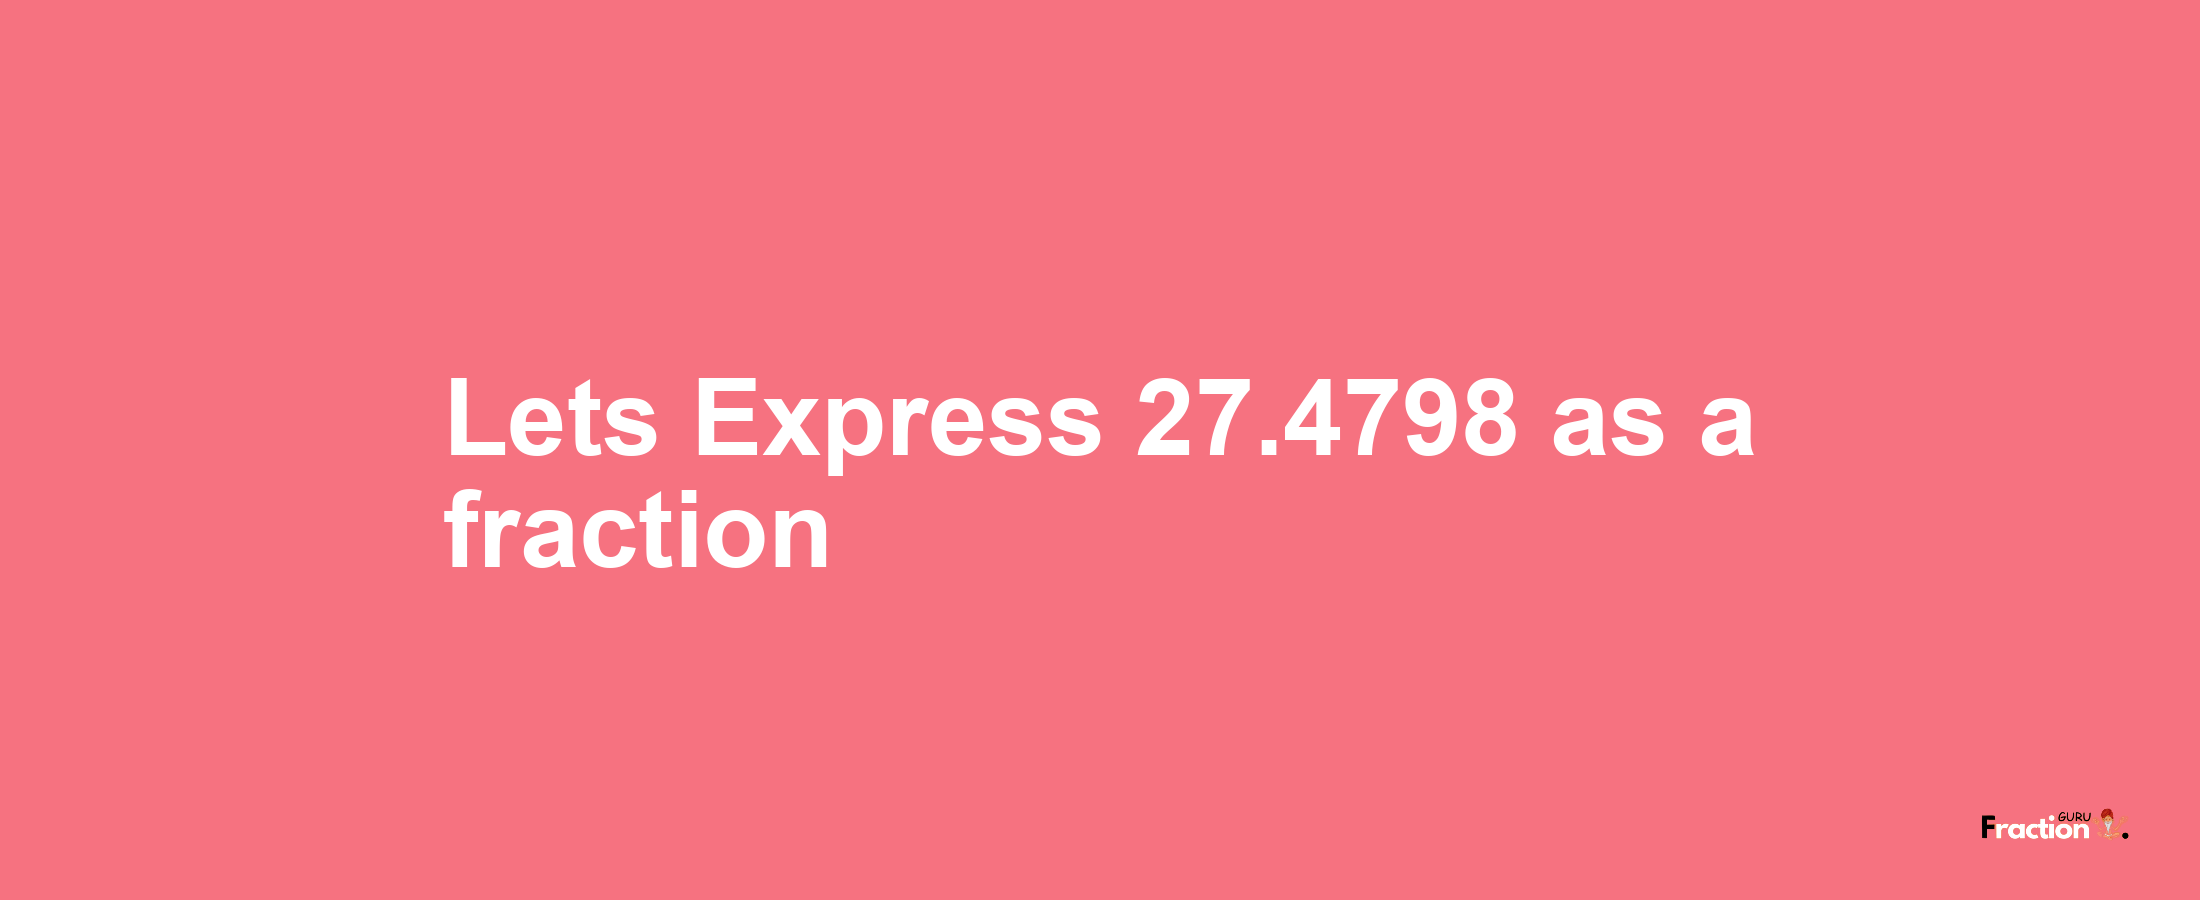 Lets Express 27.4798 as afraction